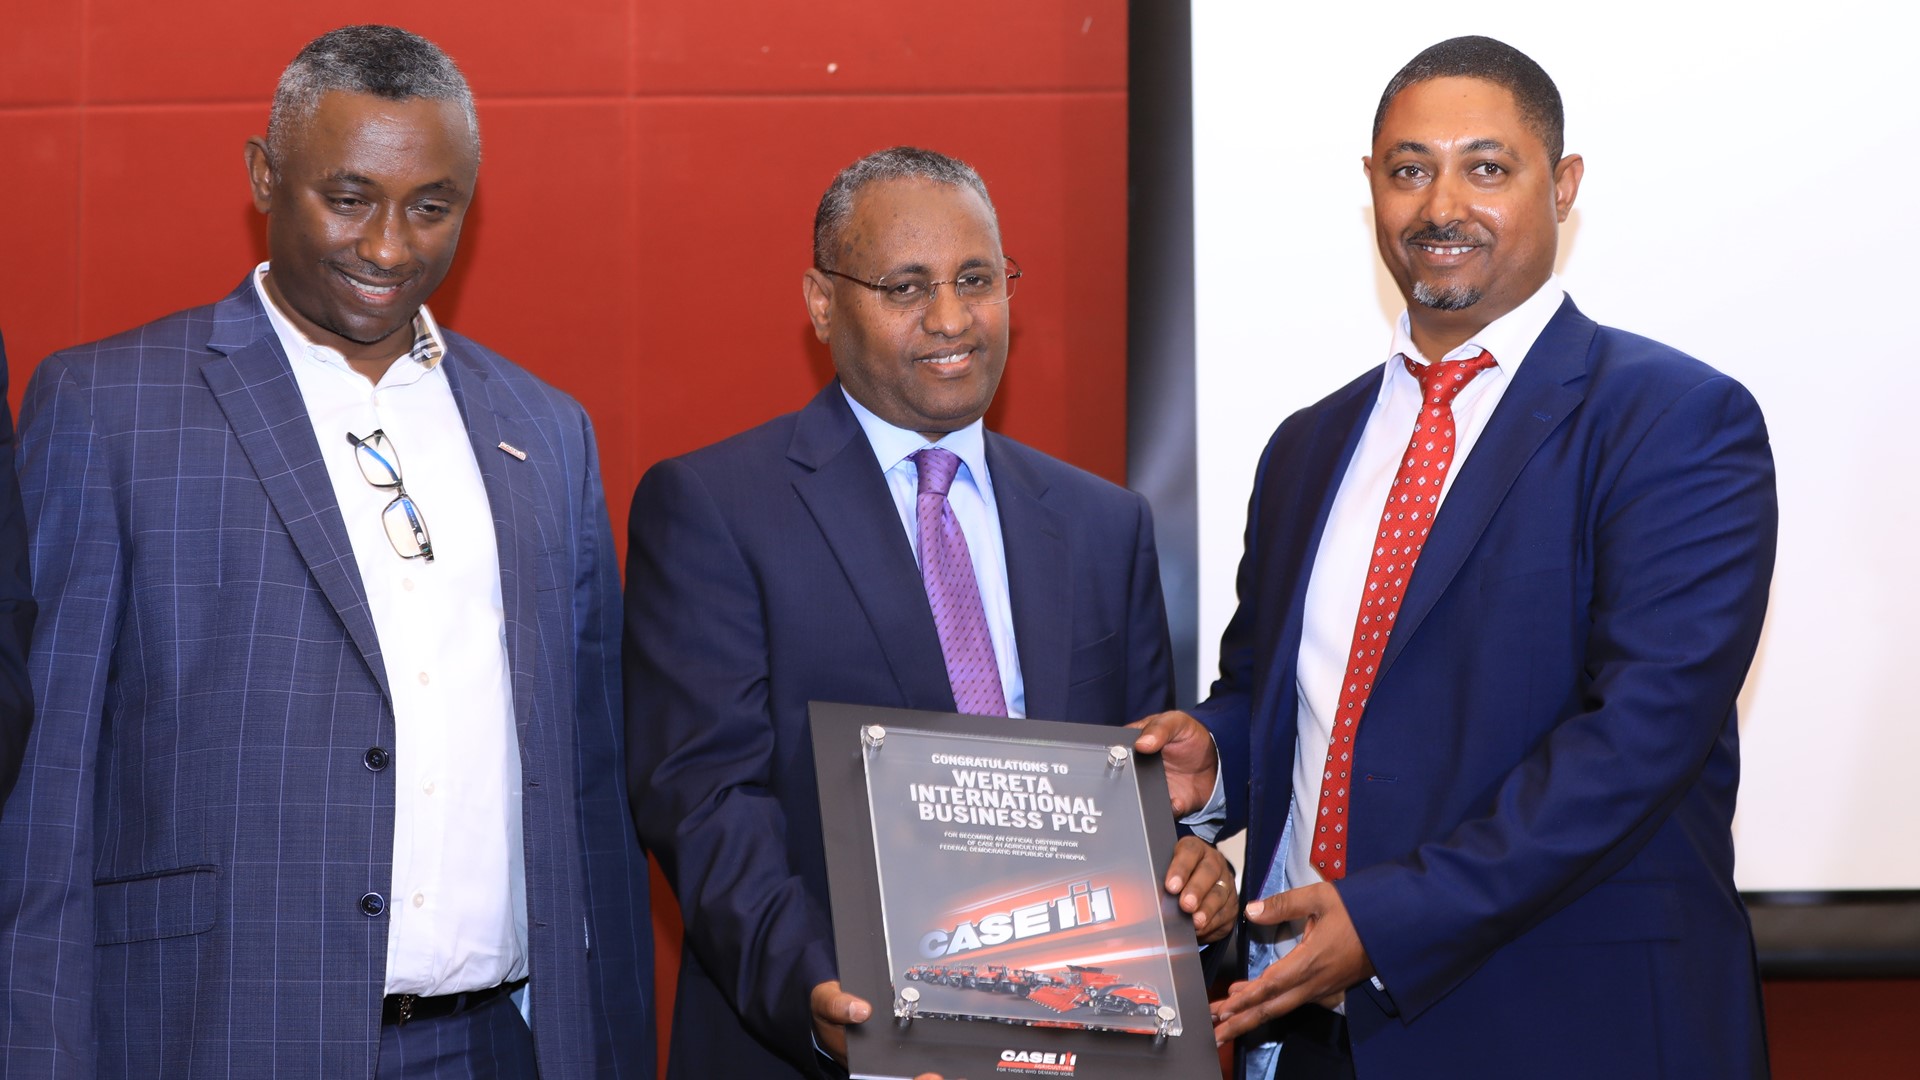 Wereta received Case IH certificate as its official distributor in Ethiopia